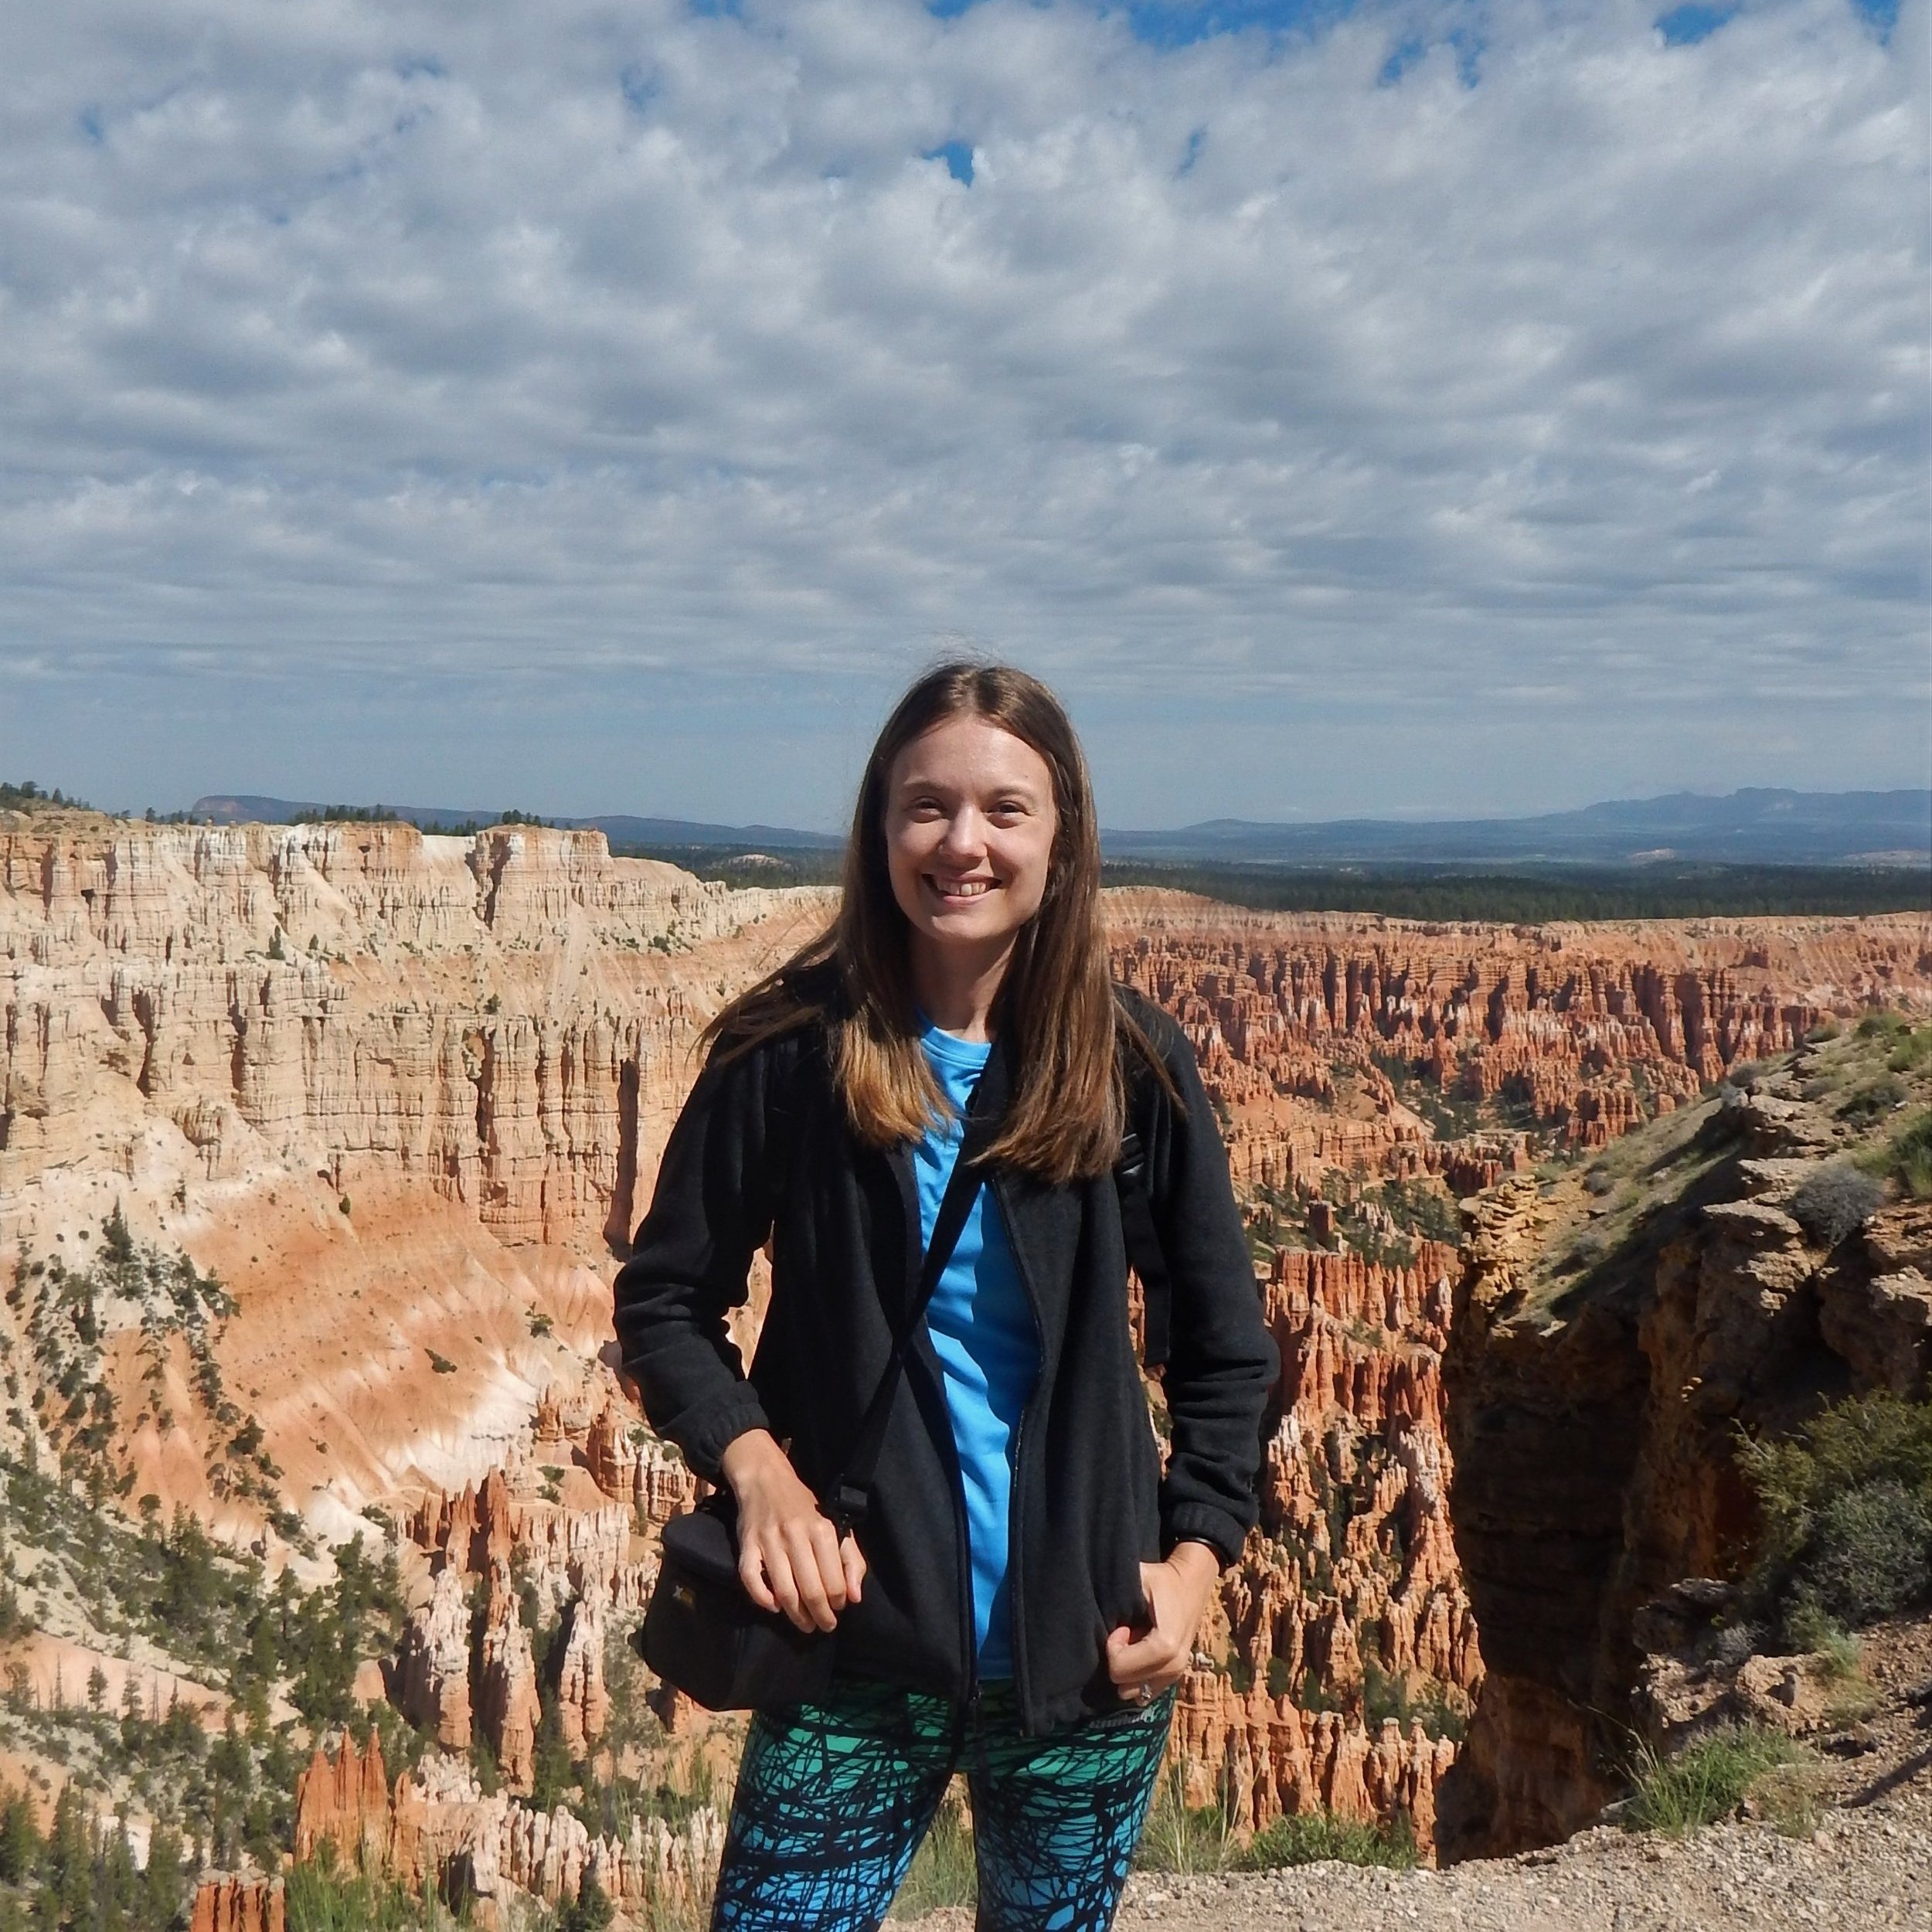 dressed-for-the-weather-at-bryce-canyon